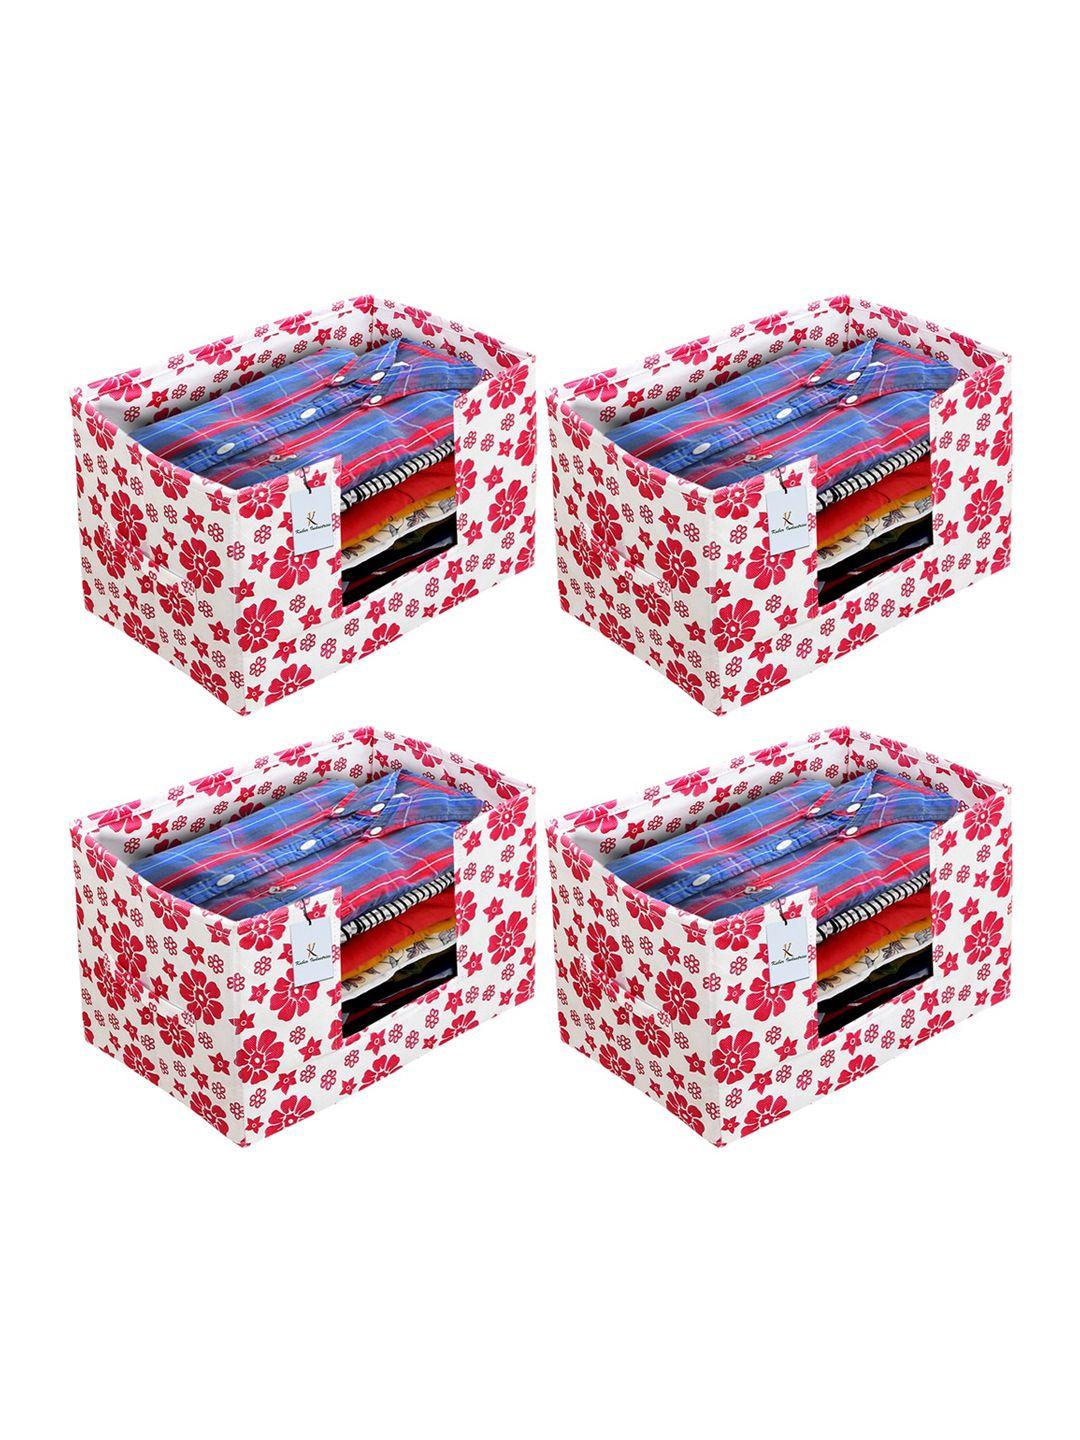 kuber industries set of 4 white & pink flower printed shirt stacker organisers with handles